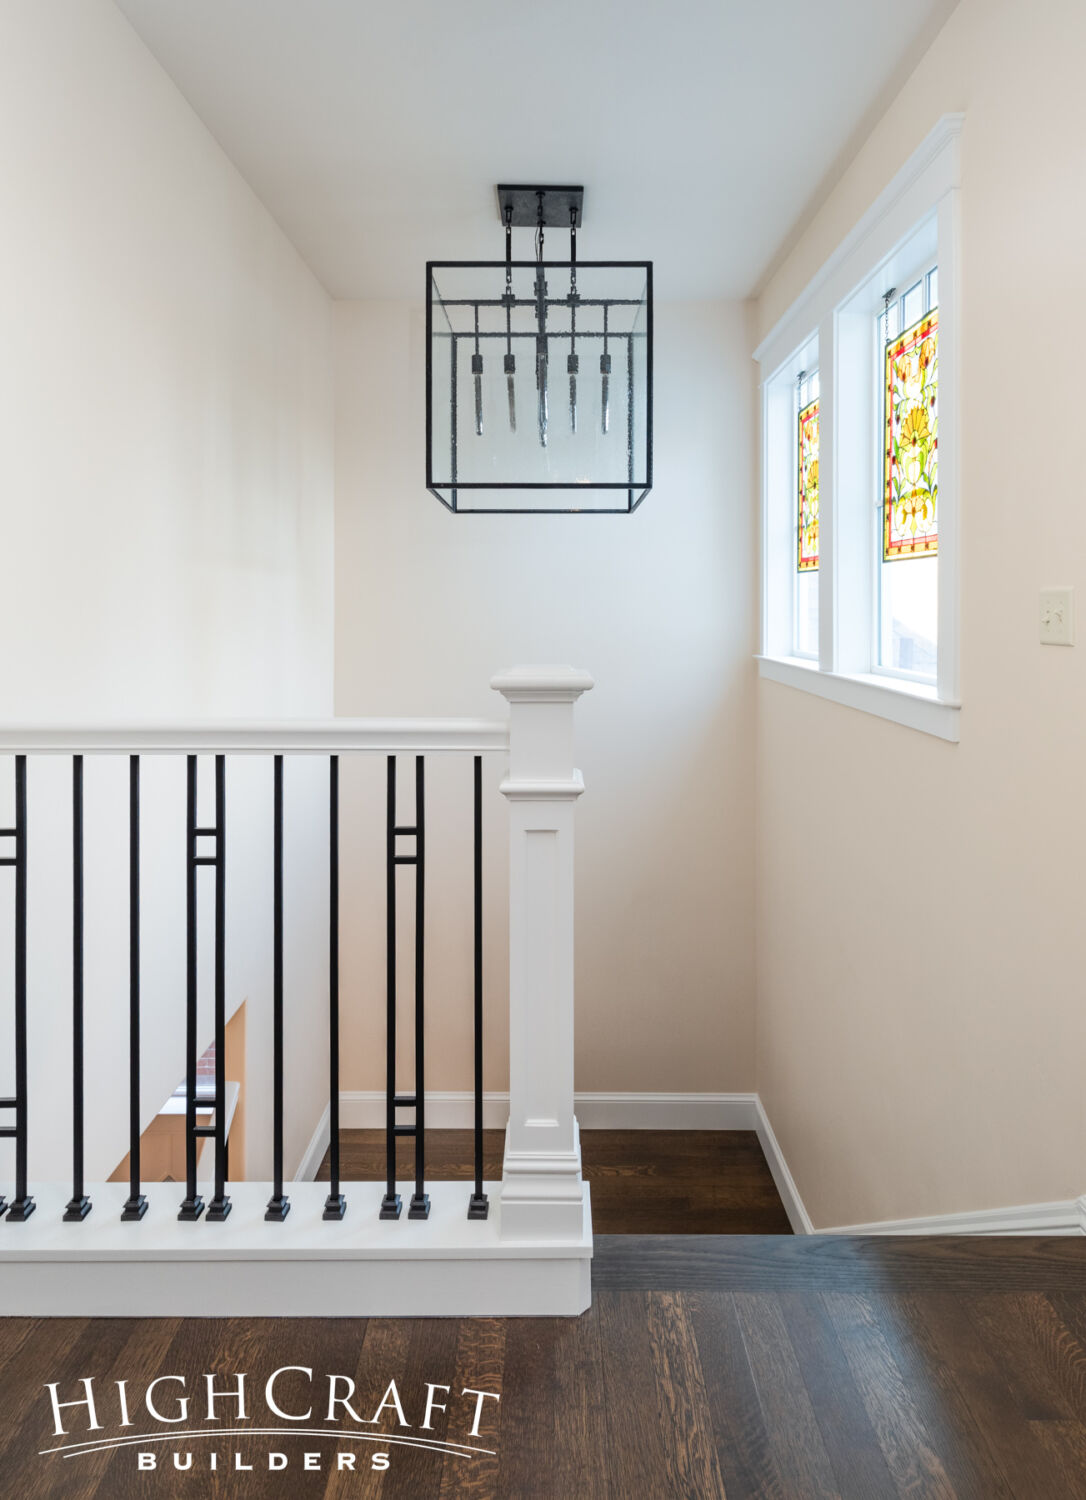 Eclectic-Remodel-in-Old-Town-Transisitonal-Stairwell-Pendant-Light